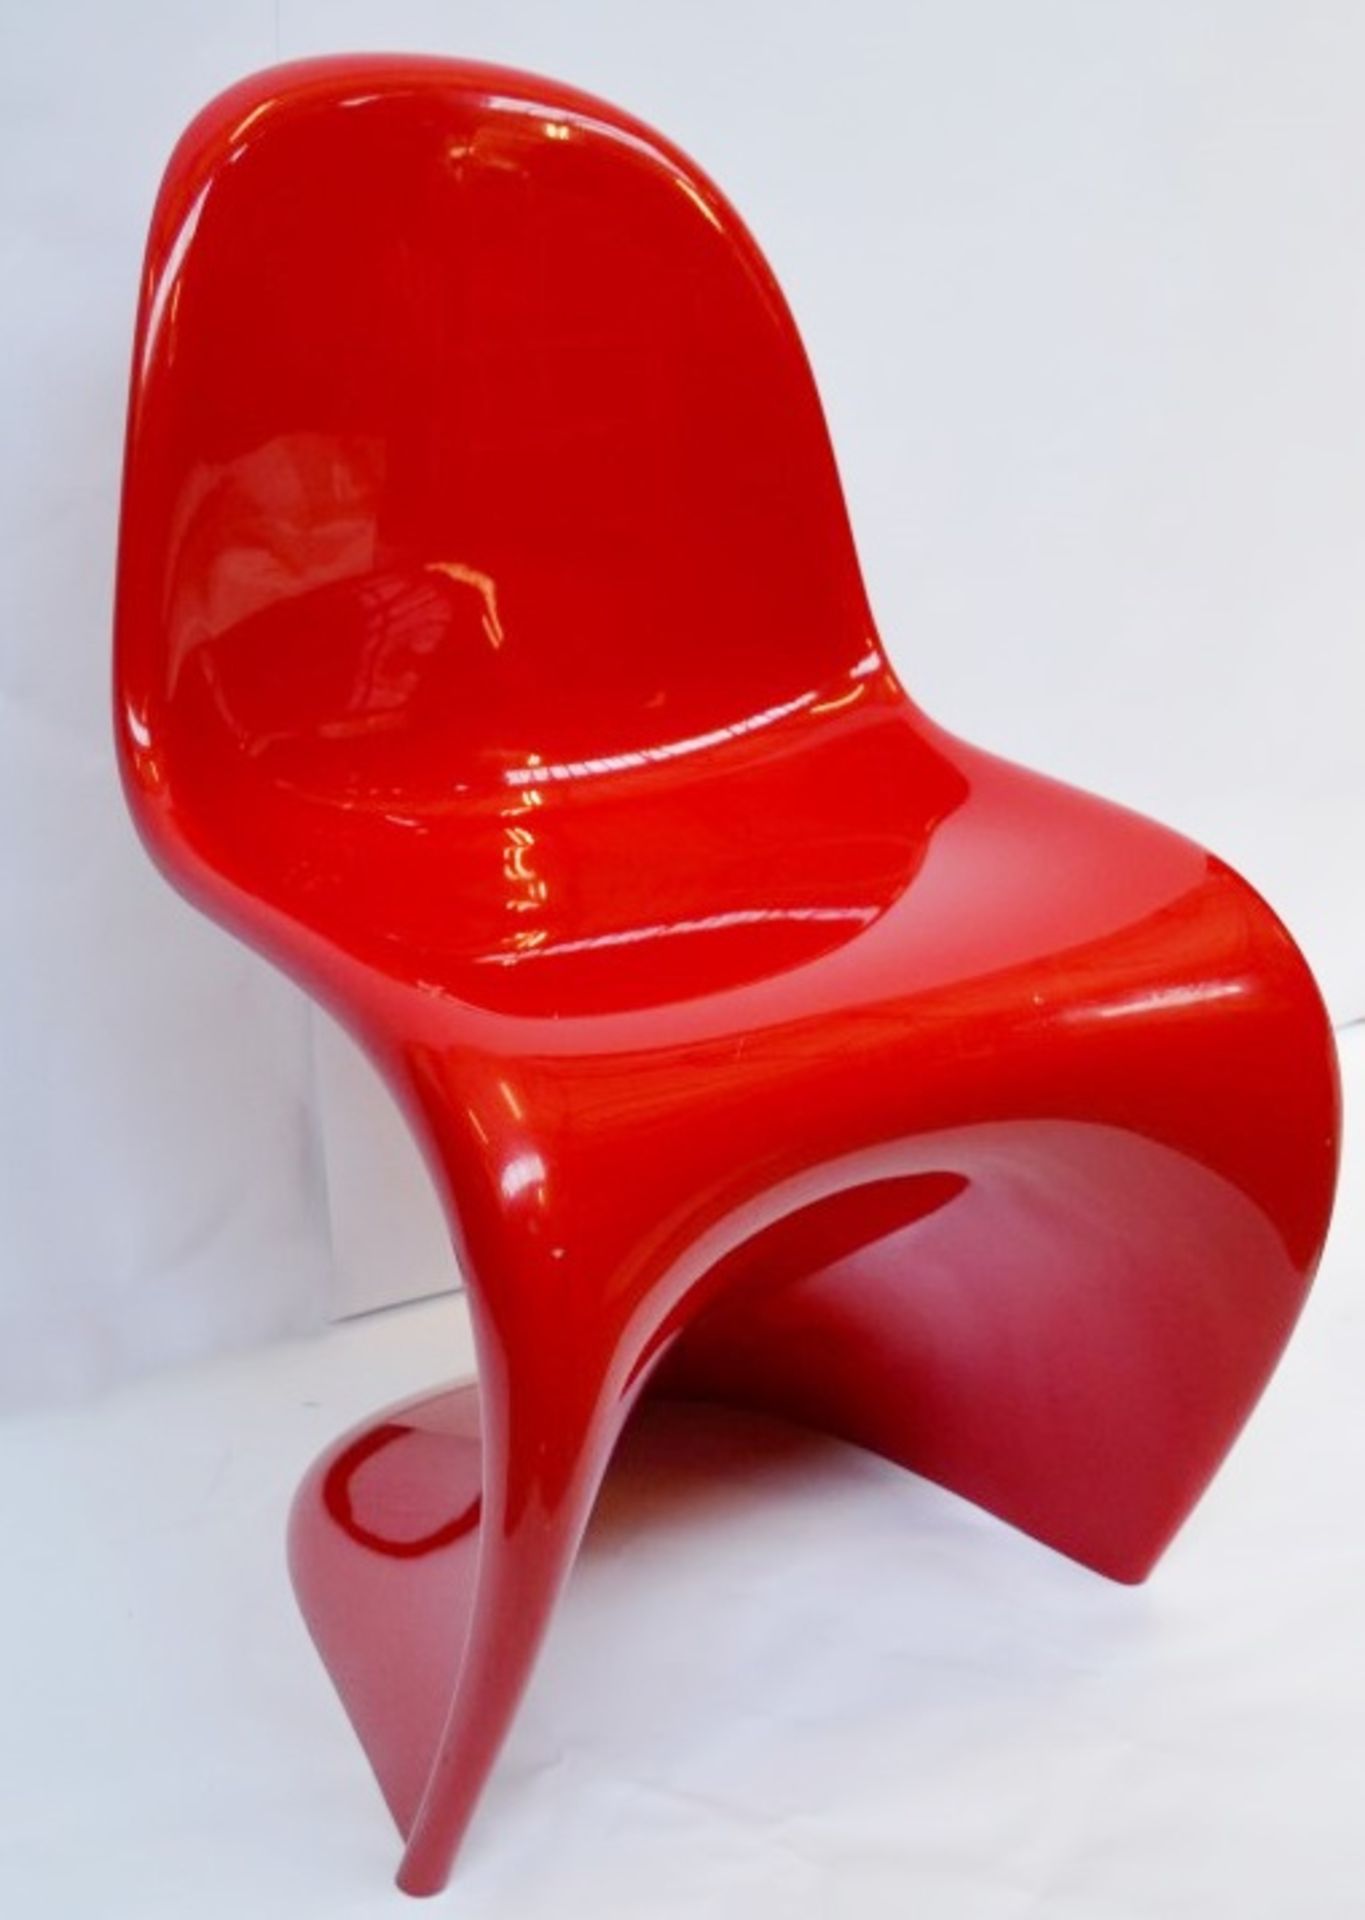 1 x VITRA Panton Chair In Classic Red - Measurements: W50 x D60 x H83cm, Seat Height: 41cm - - Image 2 of 8